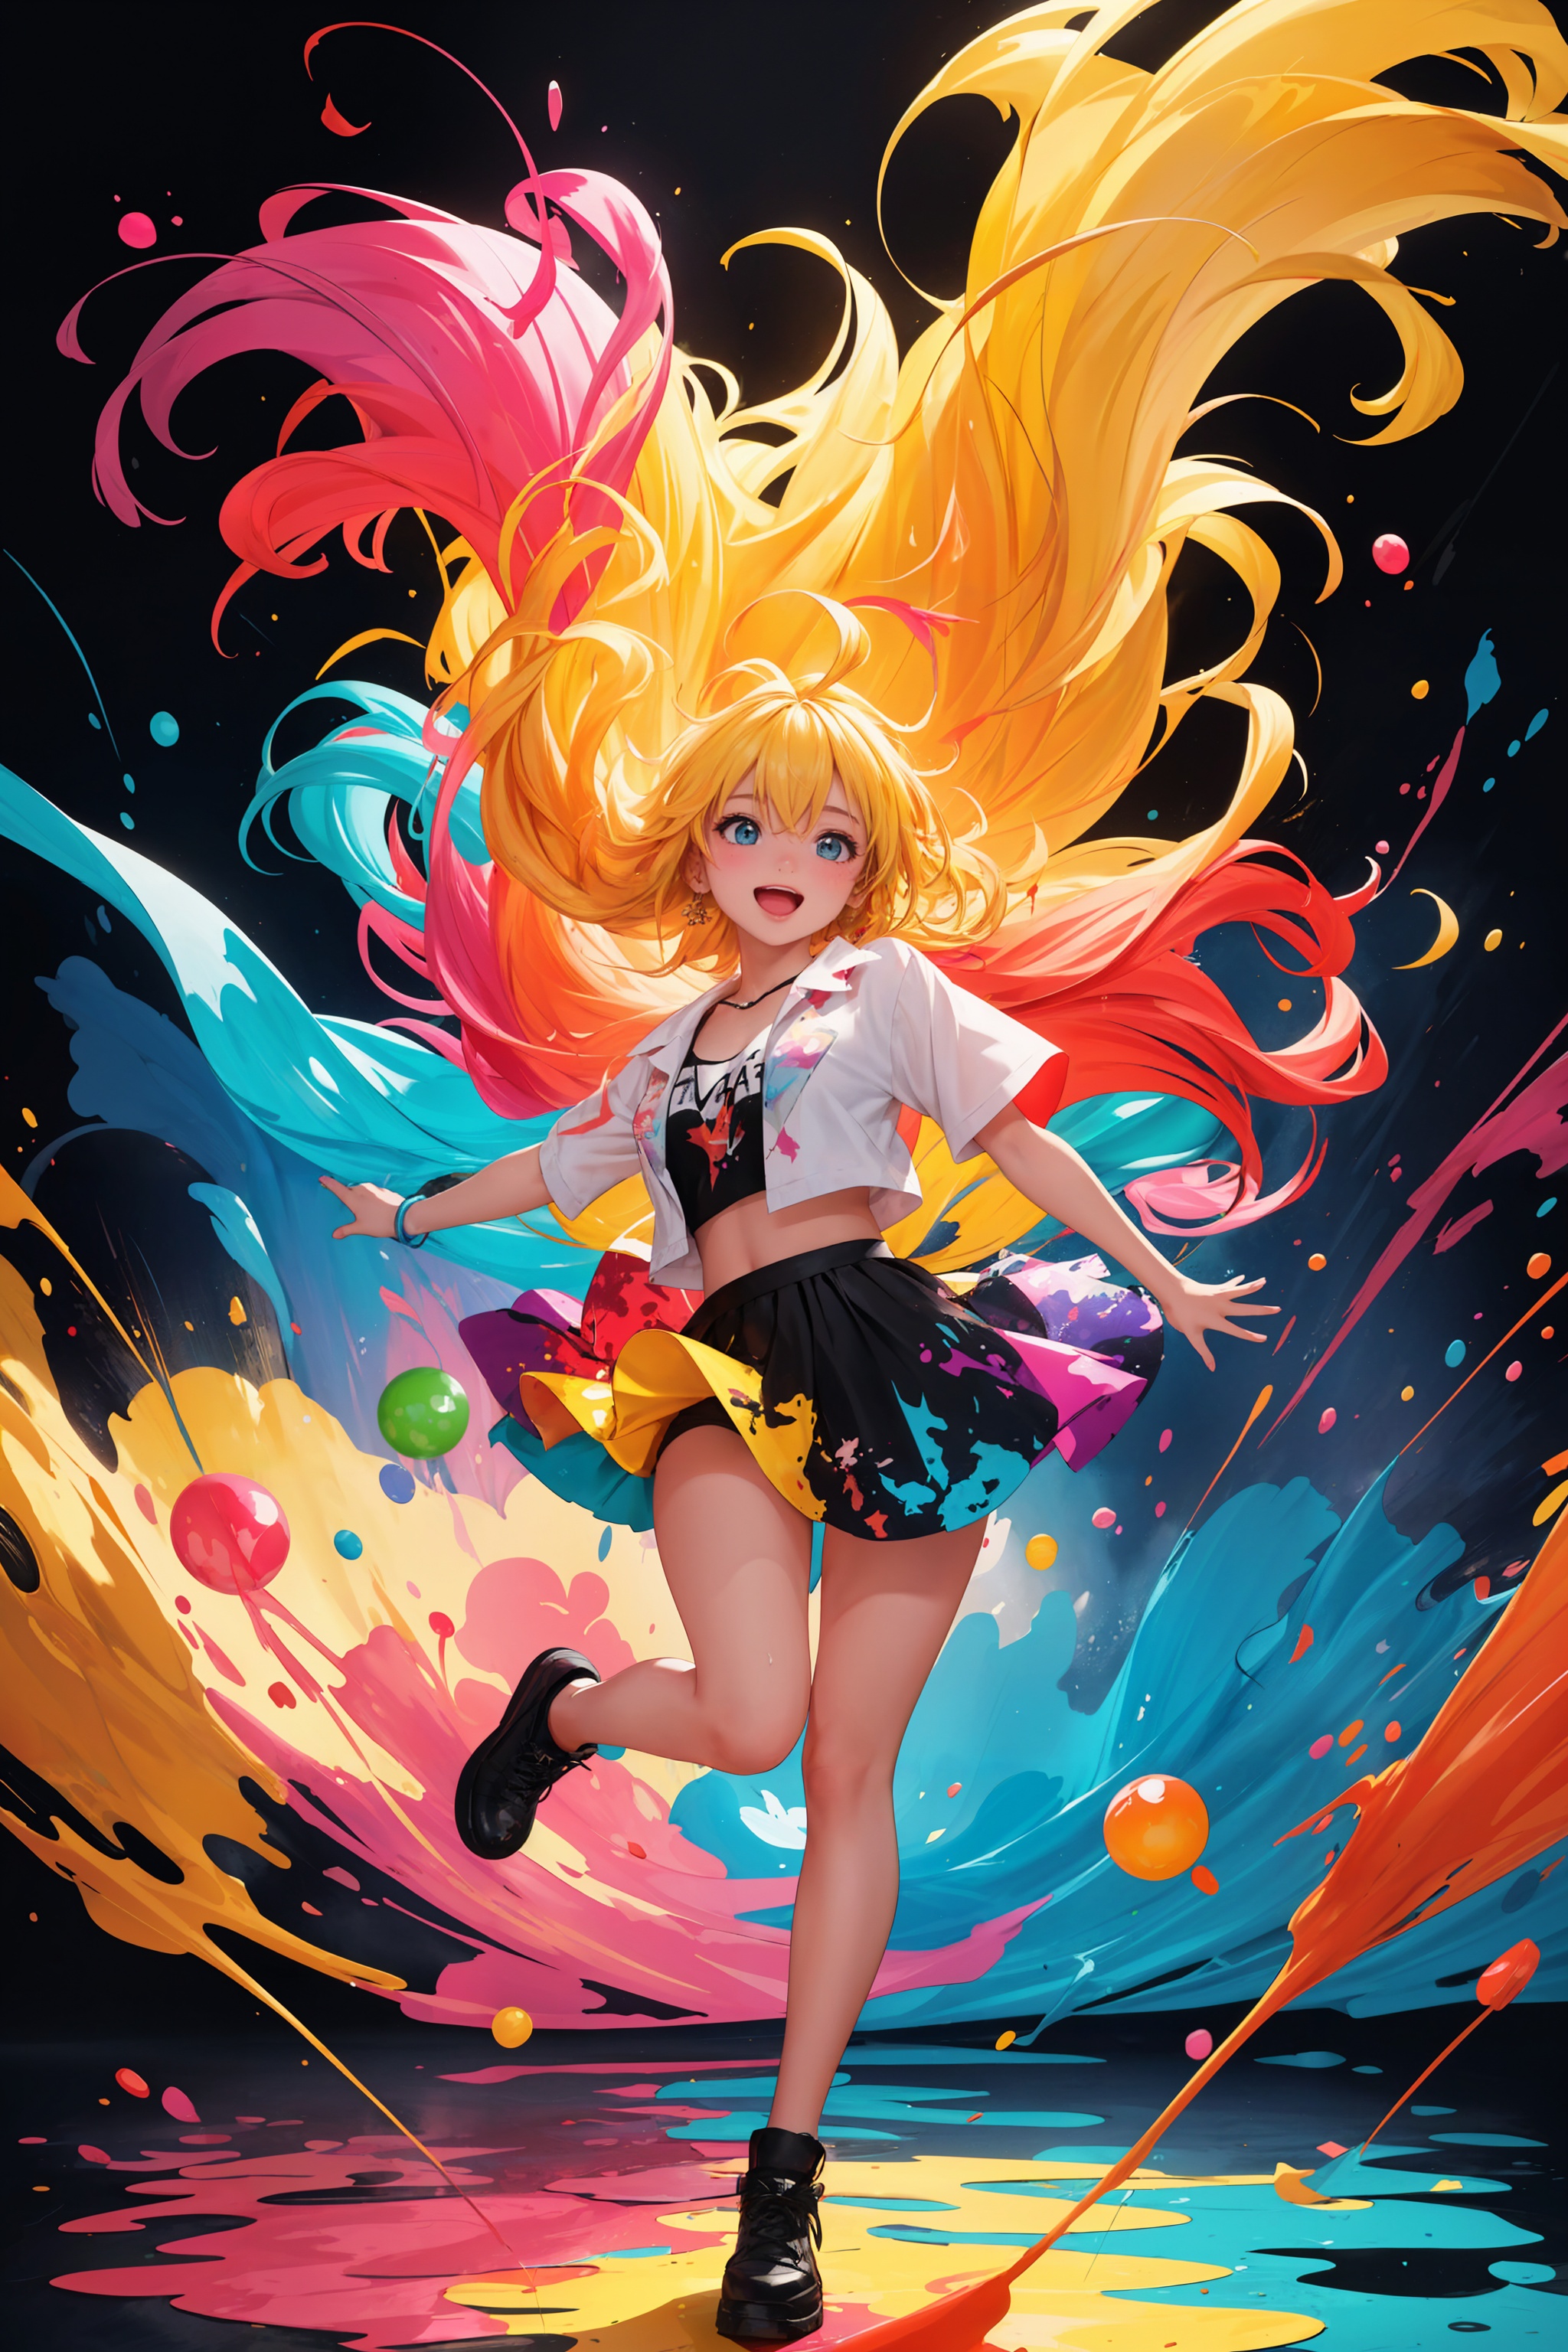 An illustration of a girl surrounded by a vibrant, multicolored paint background, reminiscent of abstract expressionist paintings by Jackson Pollock. The girl stands in the center of the composition, her blonde hair flowing gracefully. The colors in the background are a riot of hues, merging and blending together in an explosion of energy and creativity. The lighting is dynamic, with splashes of light and shadow falling across the scene, adding depth and dimension. The atmosphere is lively and joyful, reflecting the girl's playful spirit amidst the colorful chaos.